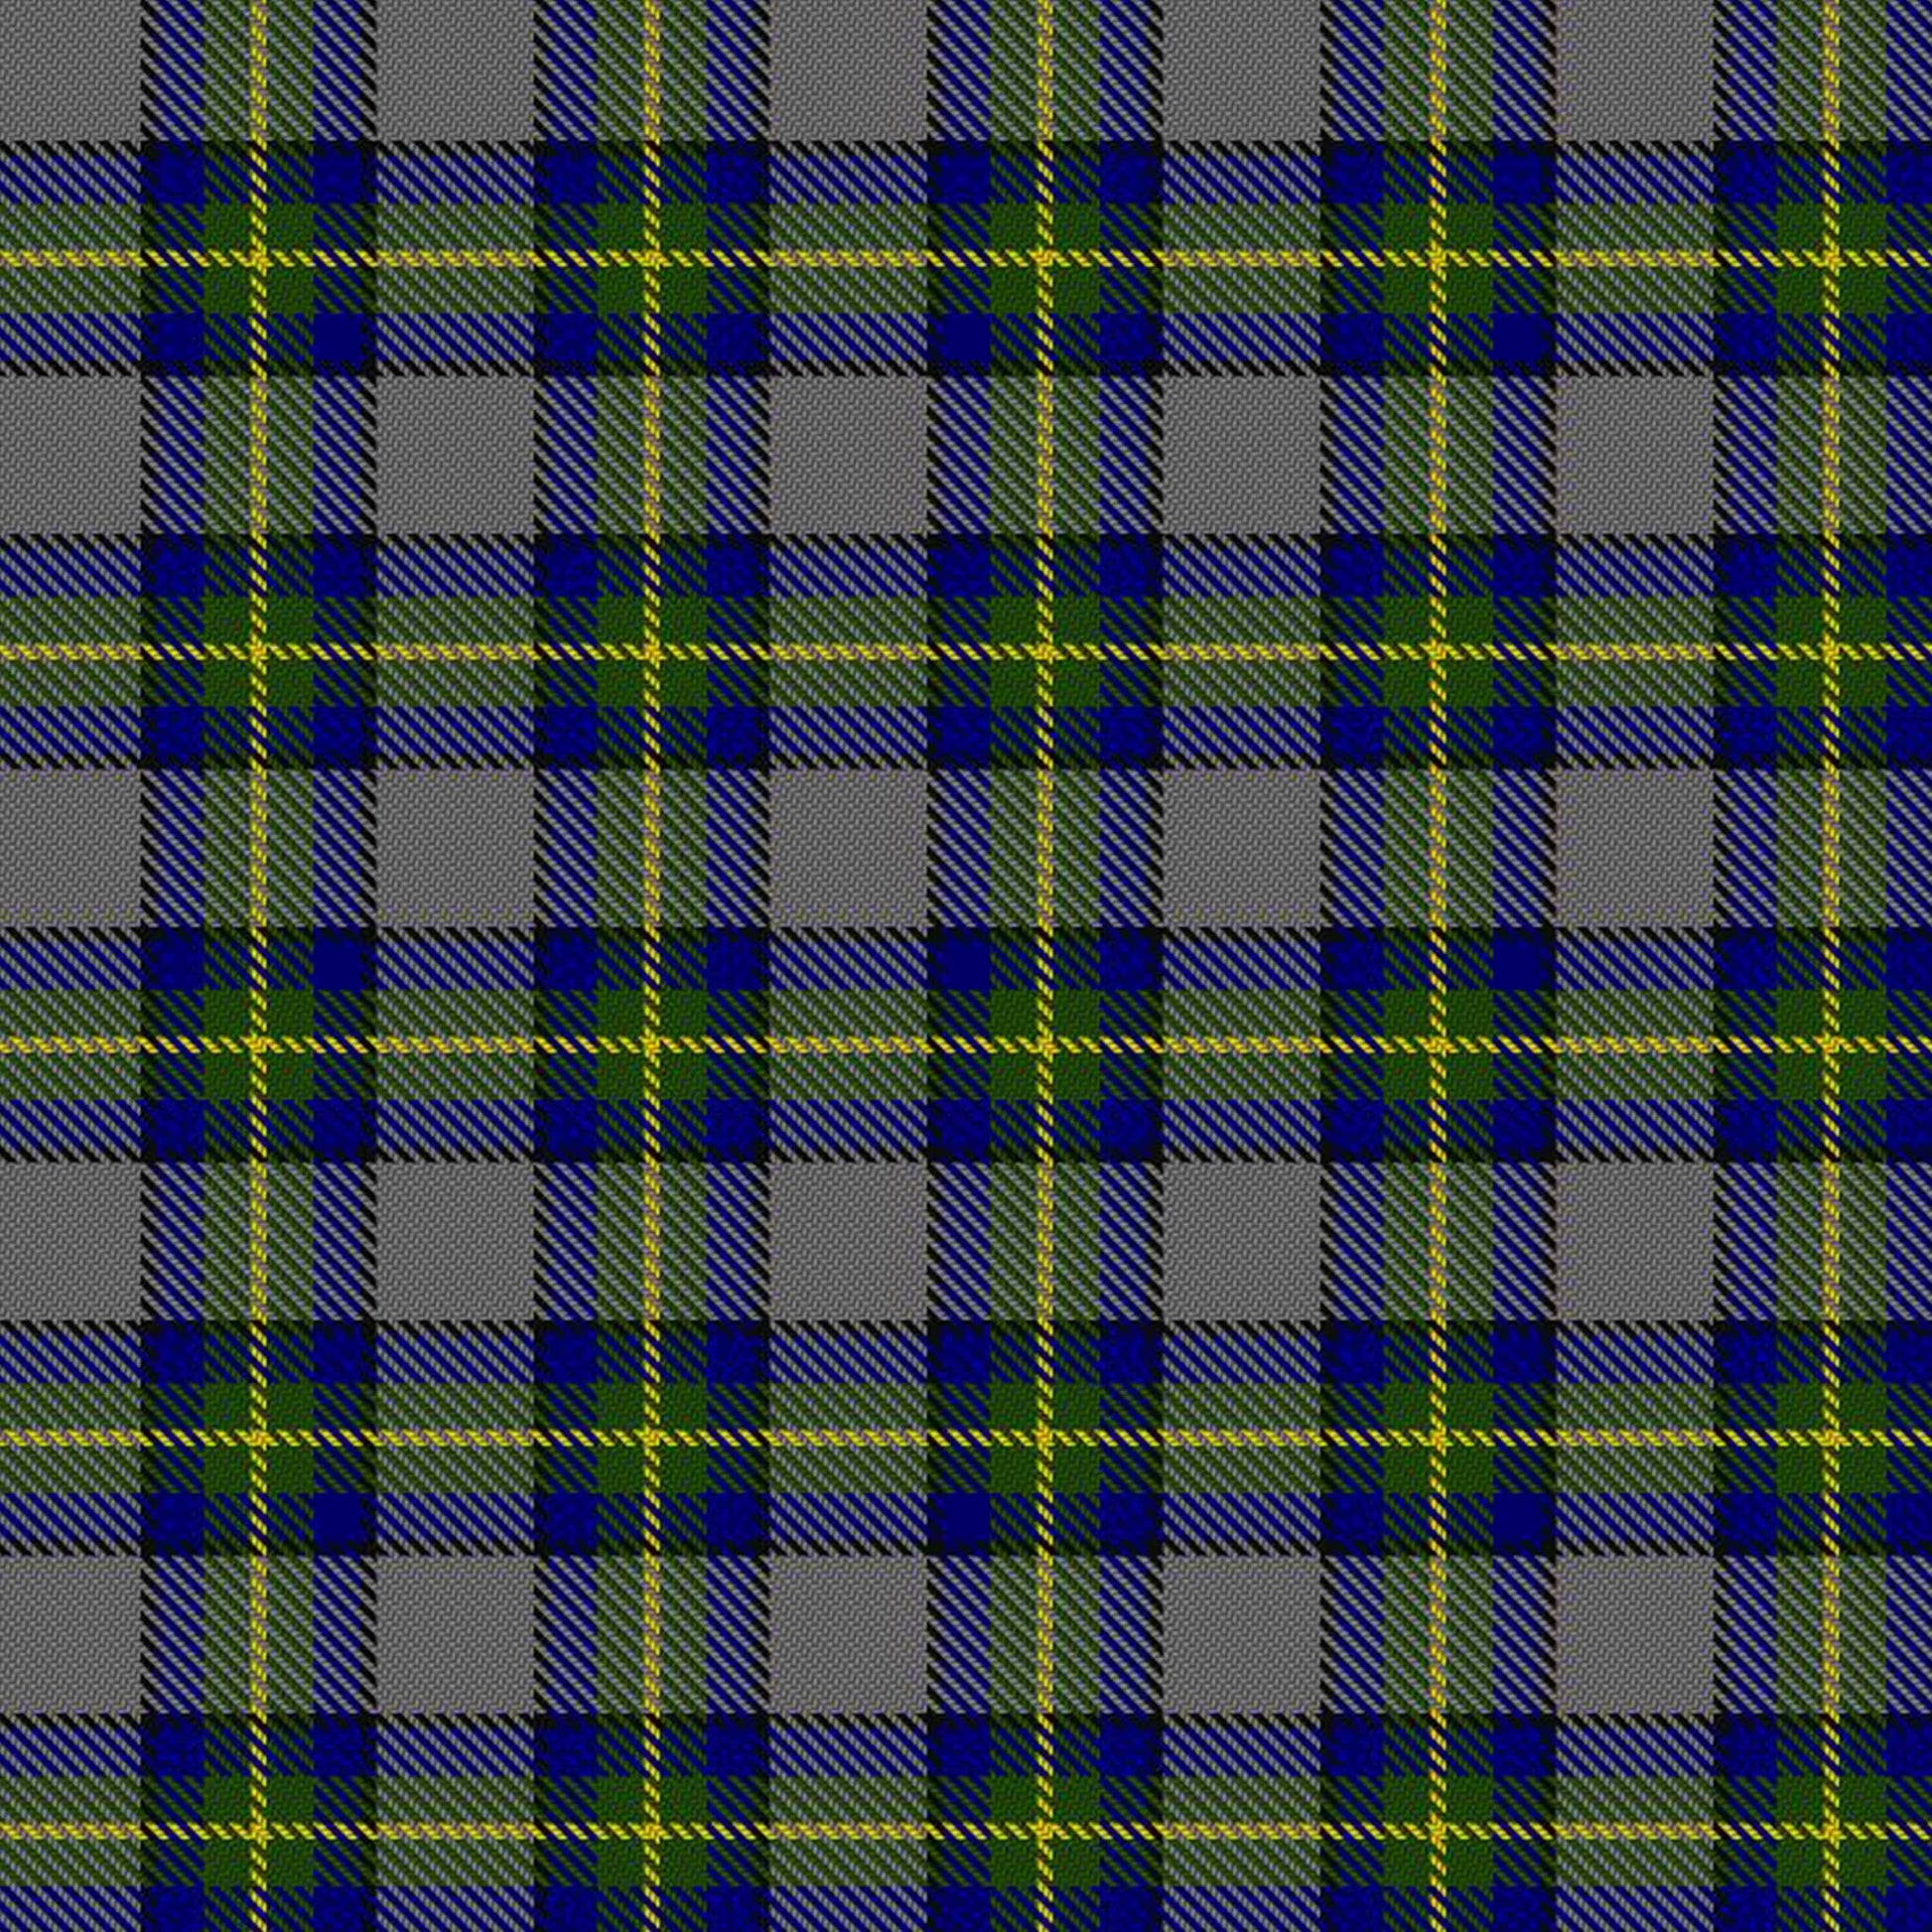 Norse Society Tartan pattern displayed on a high-quality kilt, reflecting the strength and heritage of the Viking culture